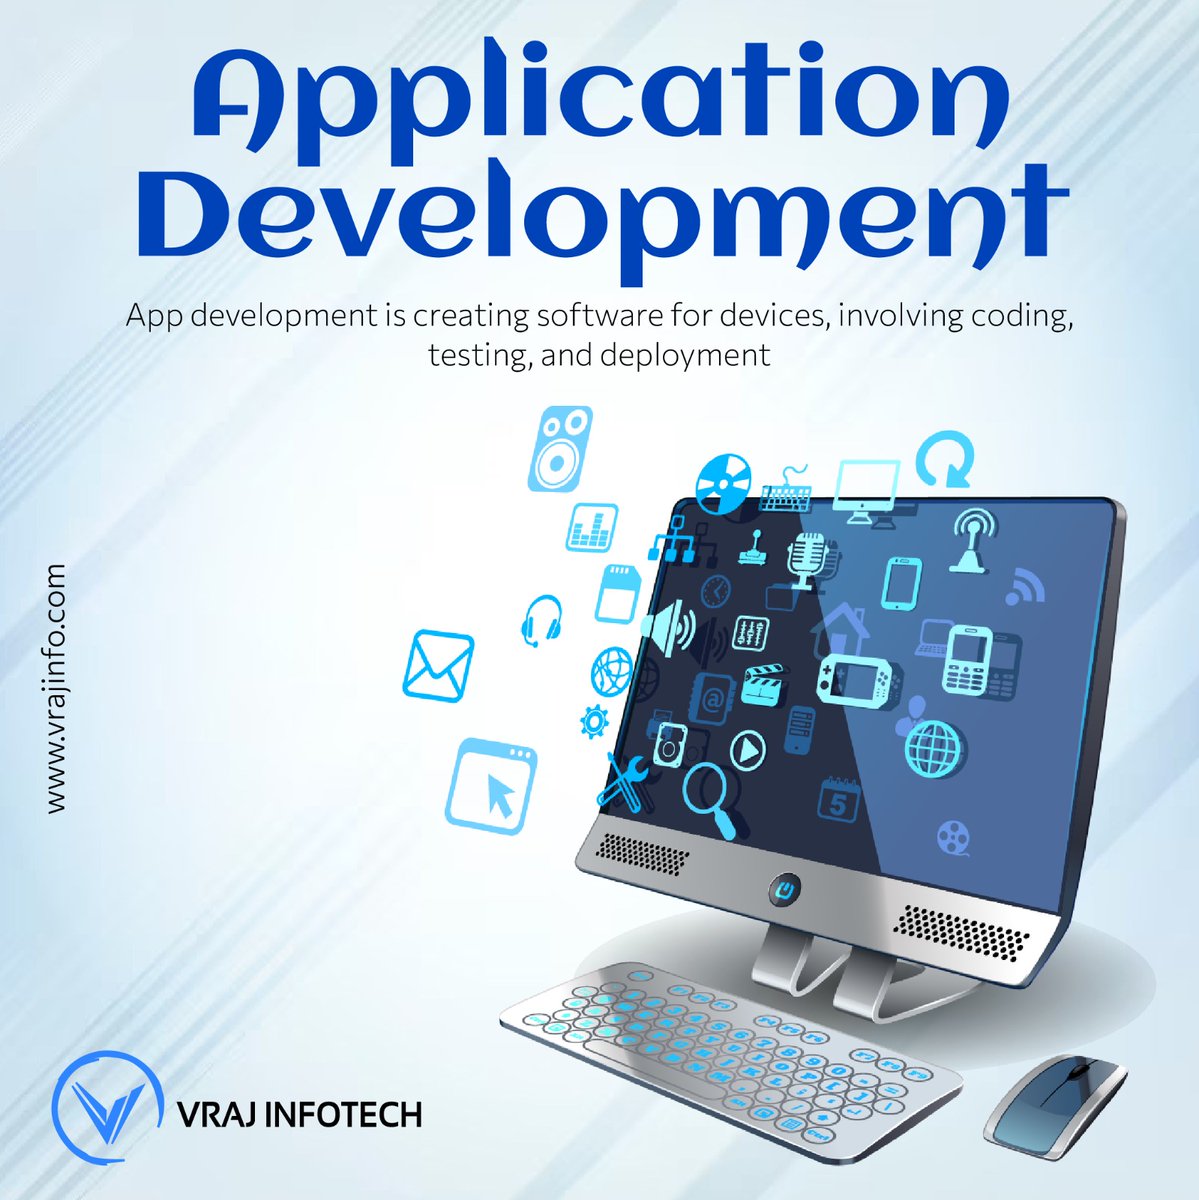 Experience the power of custom application development with Vraj Infotech. Our team turns your ideas into scalable solutions.🚀📱✨
.
.
#VrajInfotech #ApplicationDevelopment #CustomSolutions #Innovation 📲📲